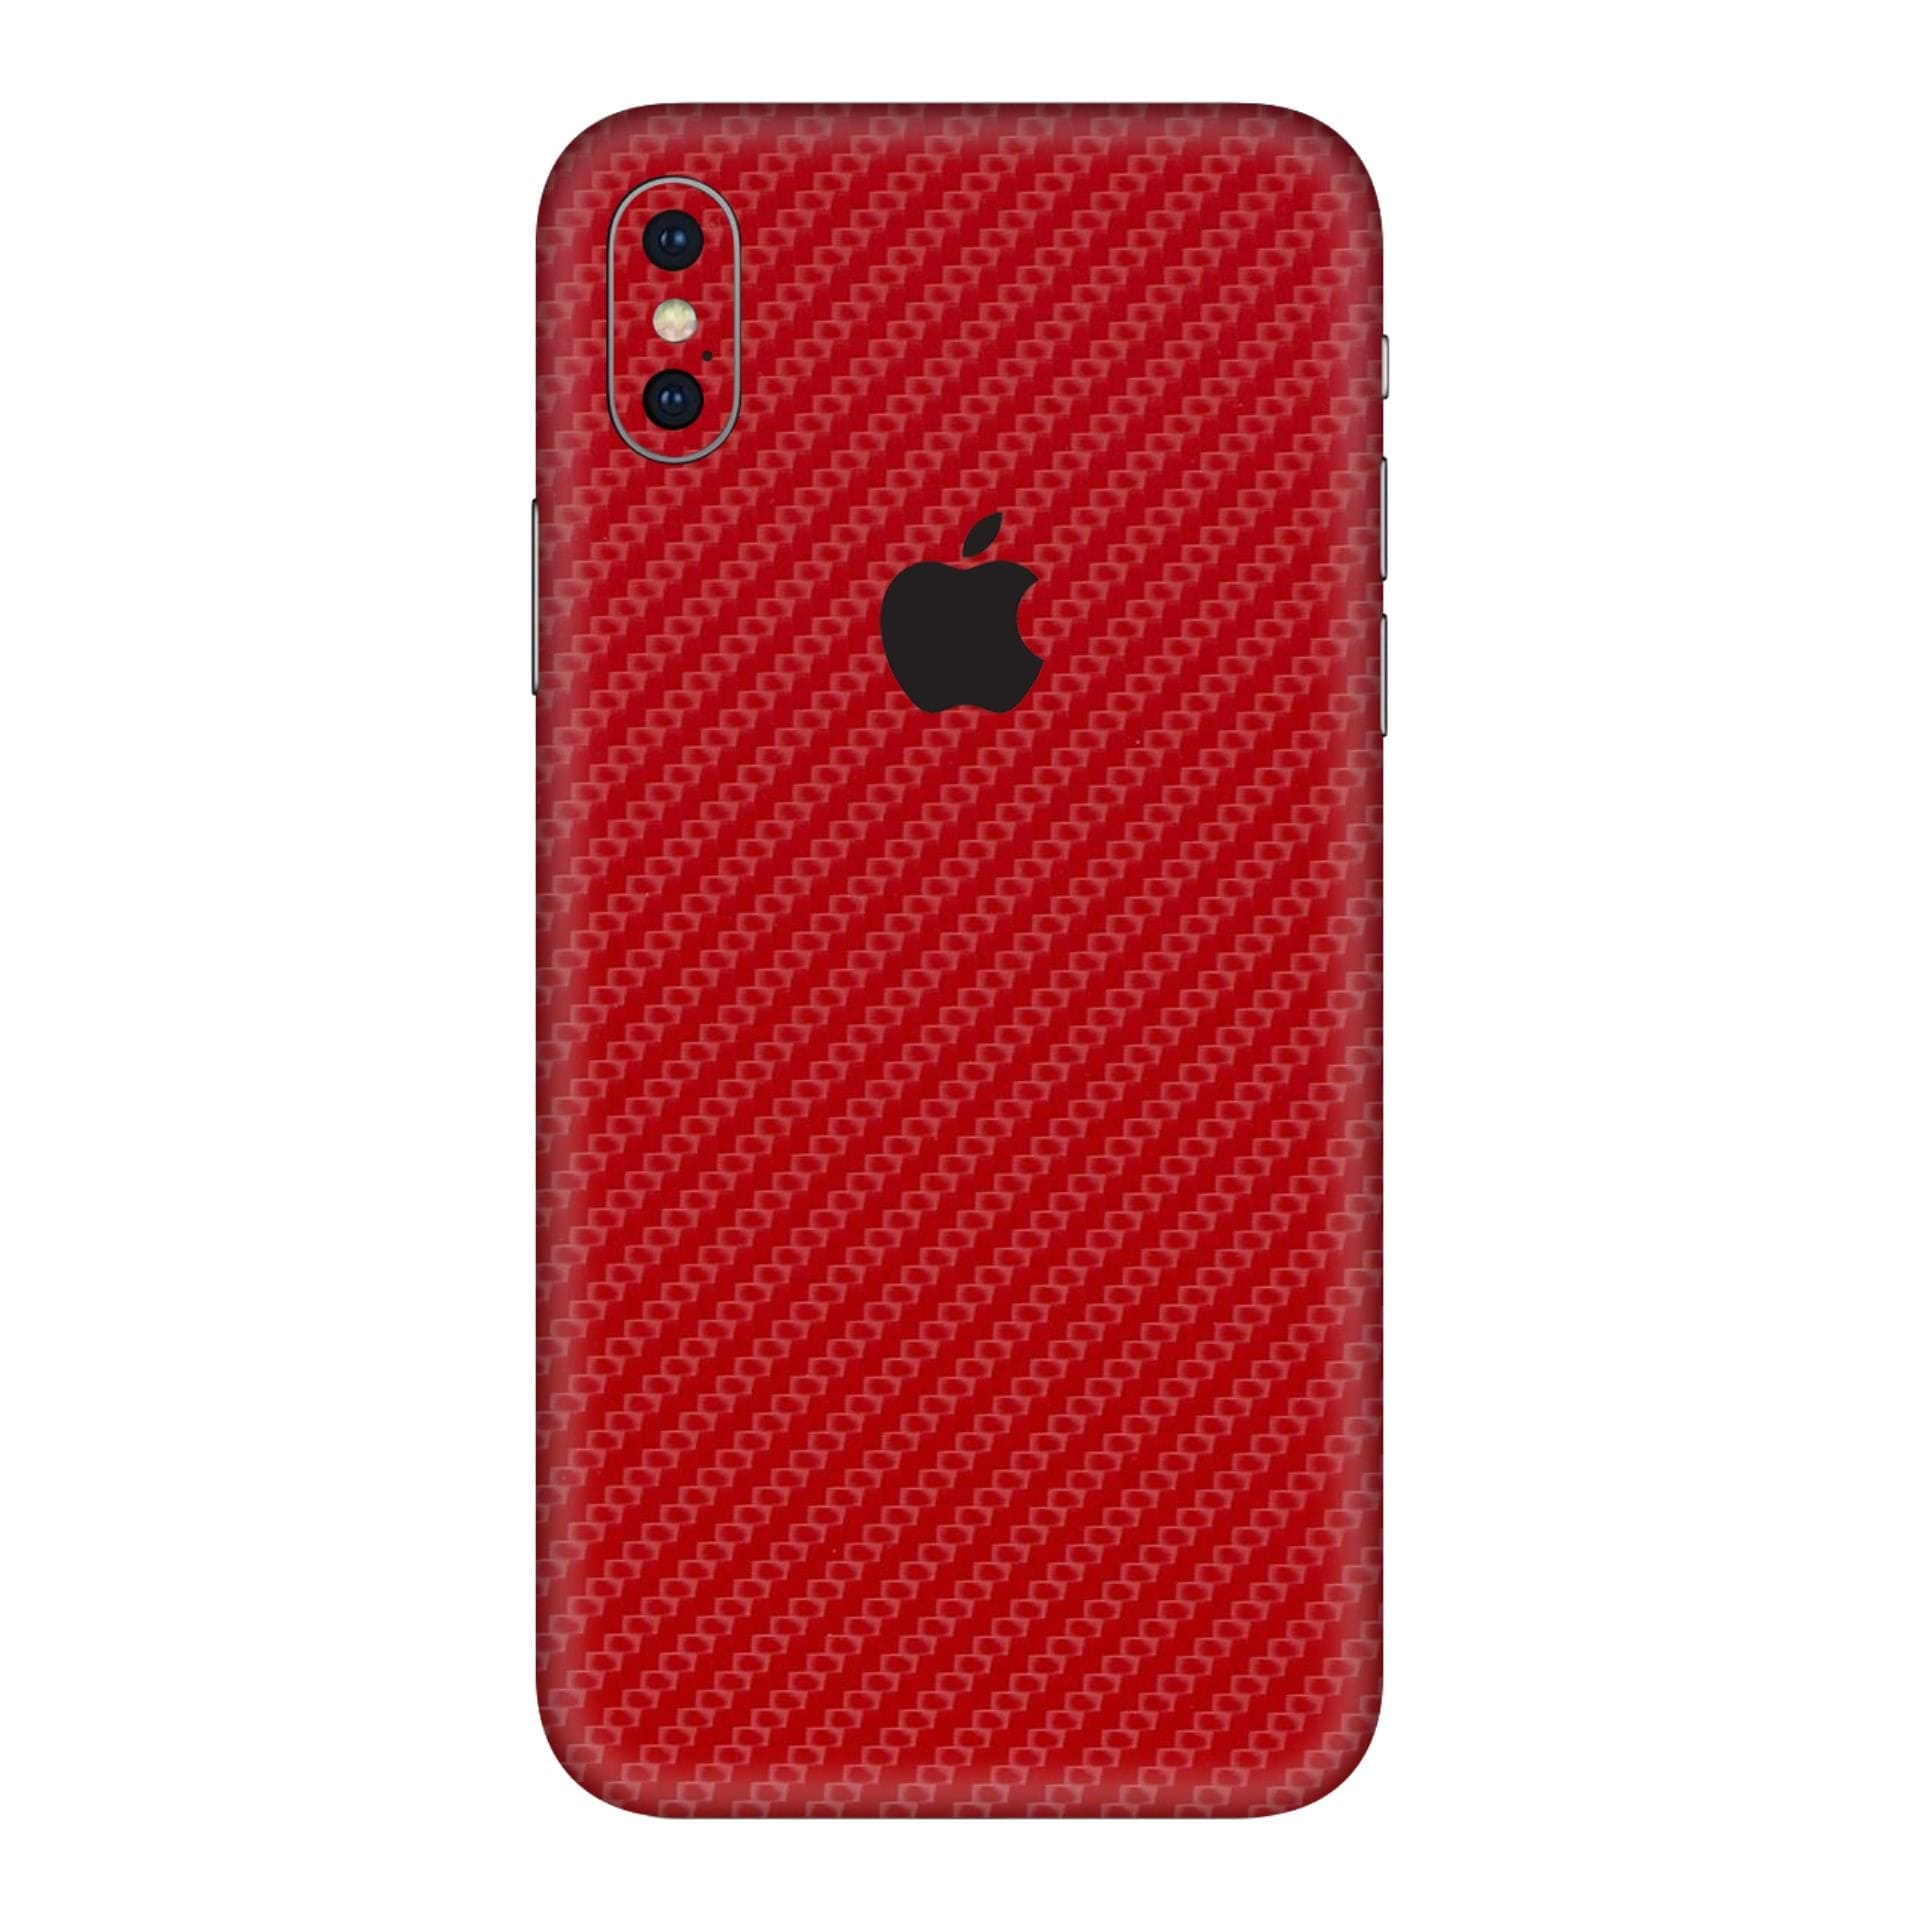 iphone X Carbon Red skins